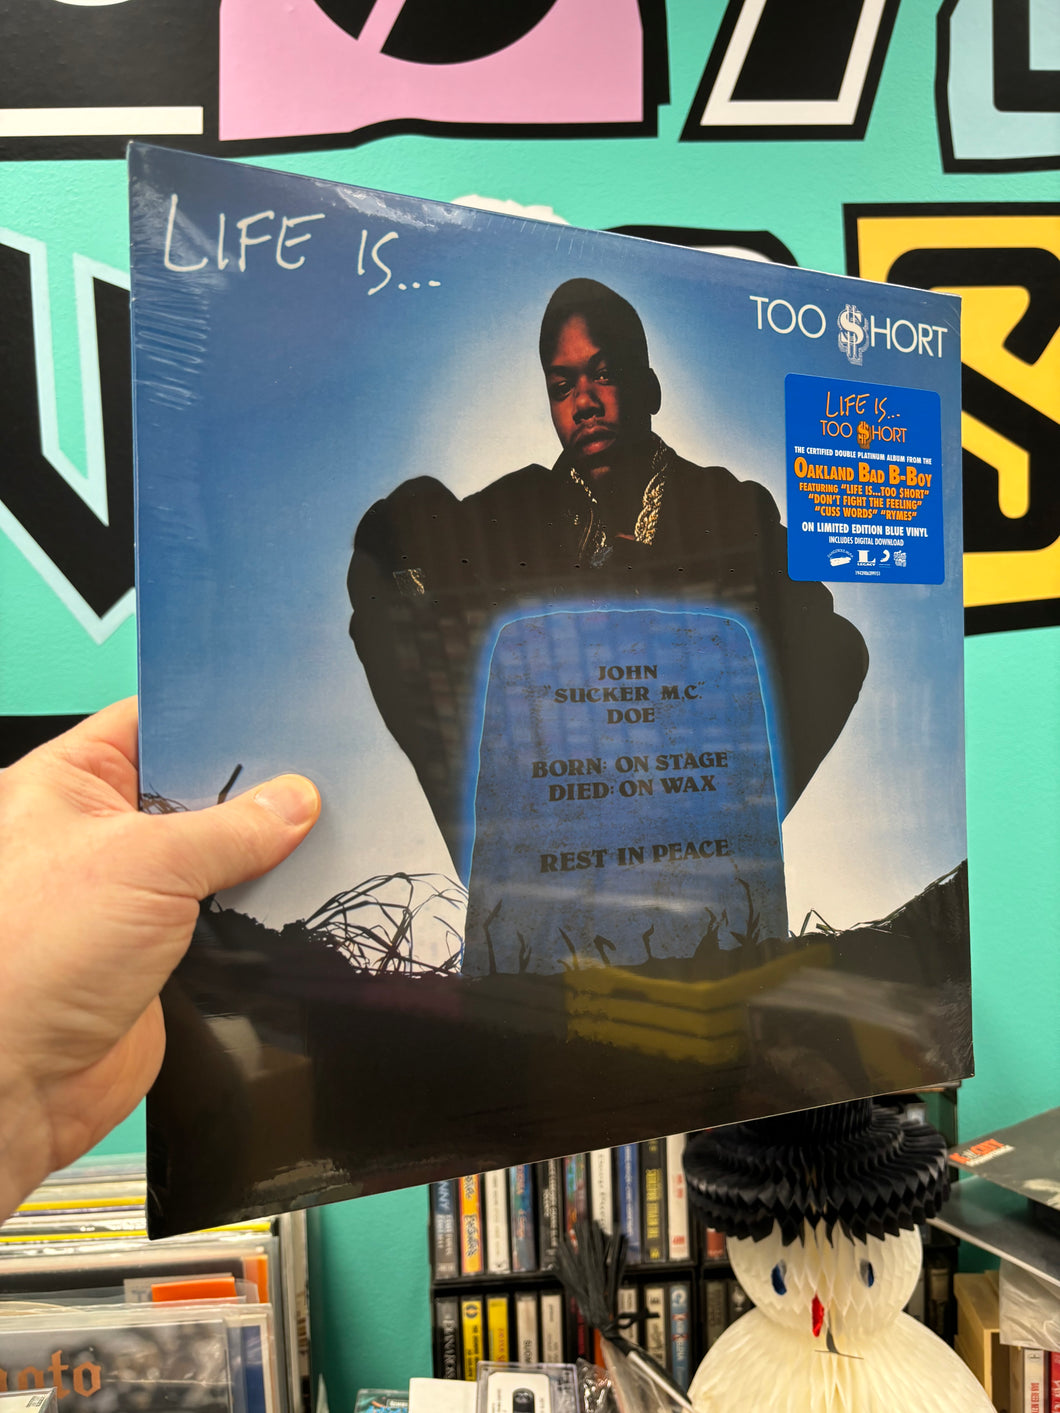 Too $hort: Life Is Too Short, LP, Blue Swirl vinyl, reissue, Limited Edition, US 2021